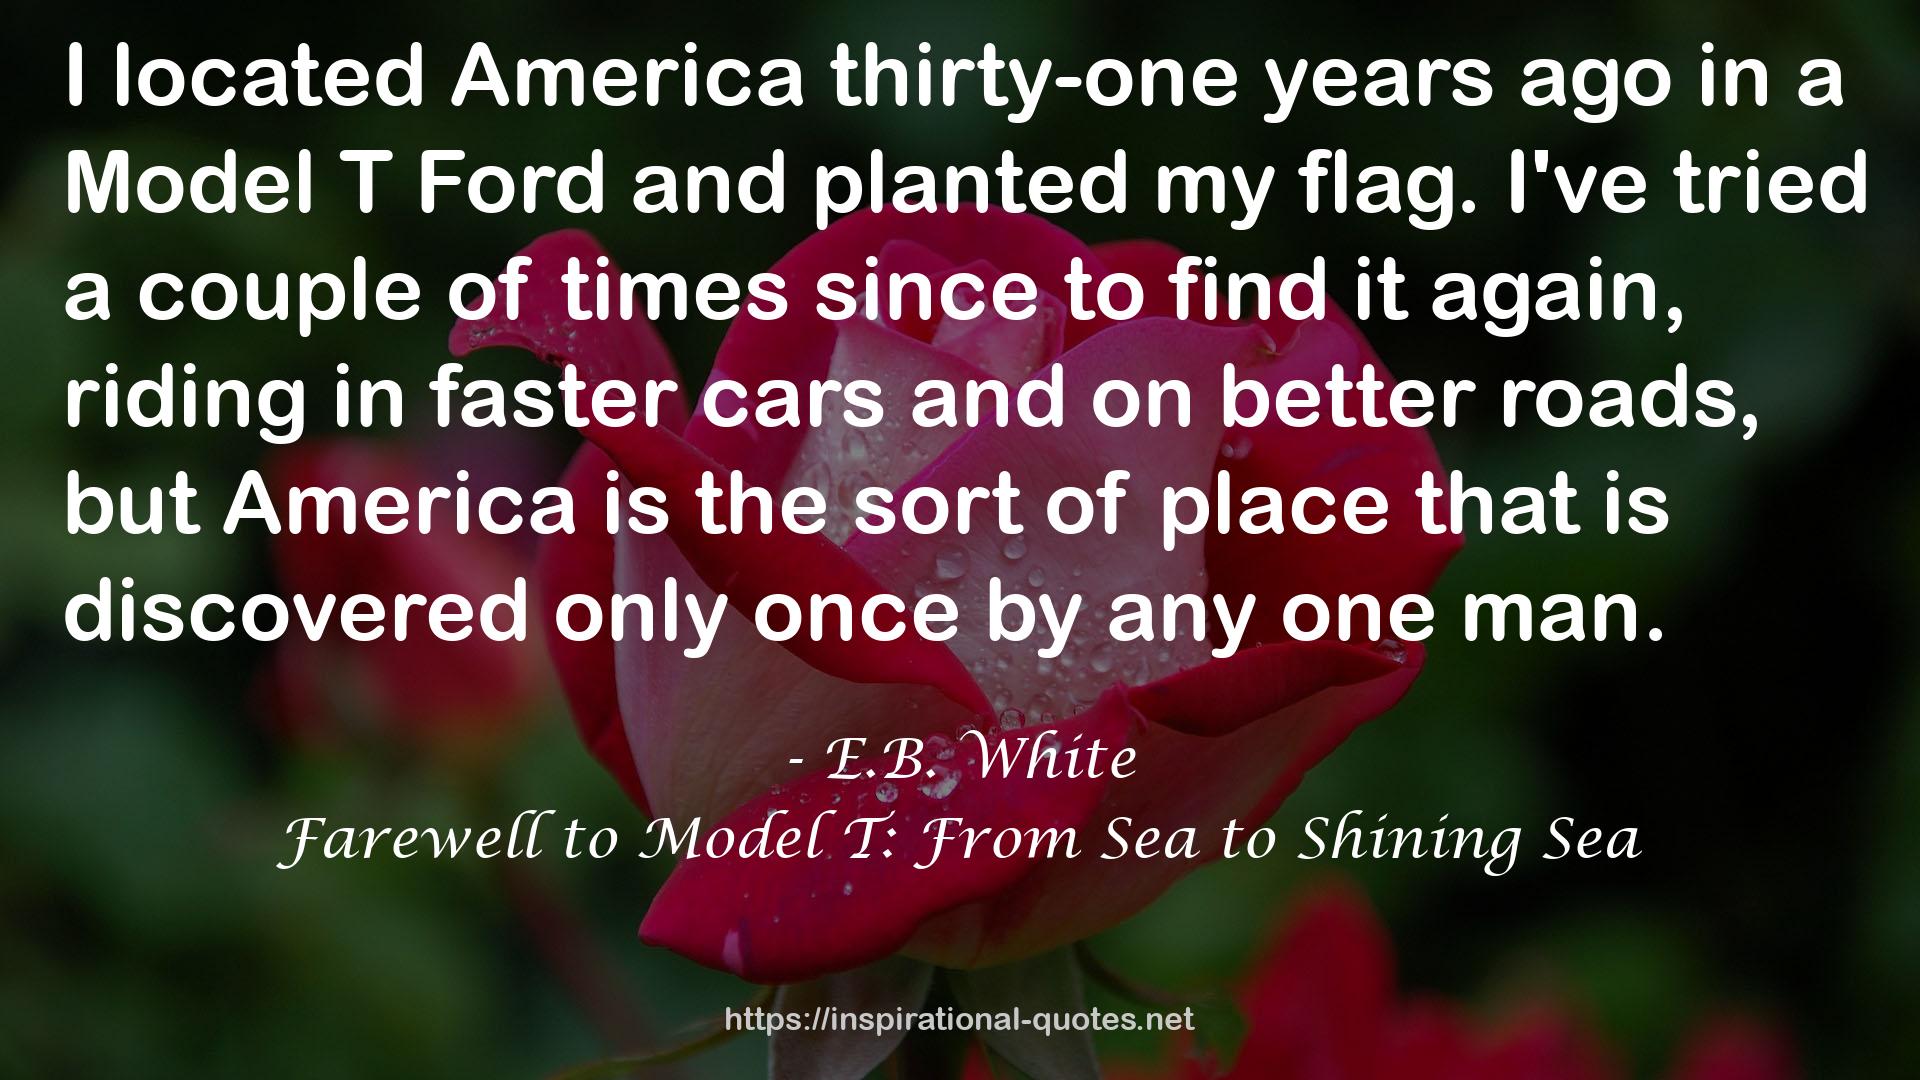 Farewell to Model T: From Sea to Shining Sea QUOTES